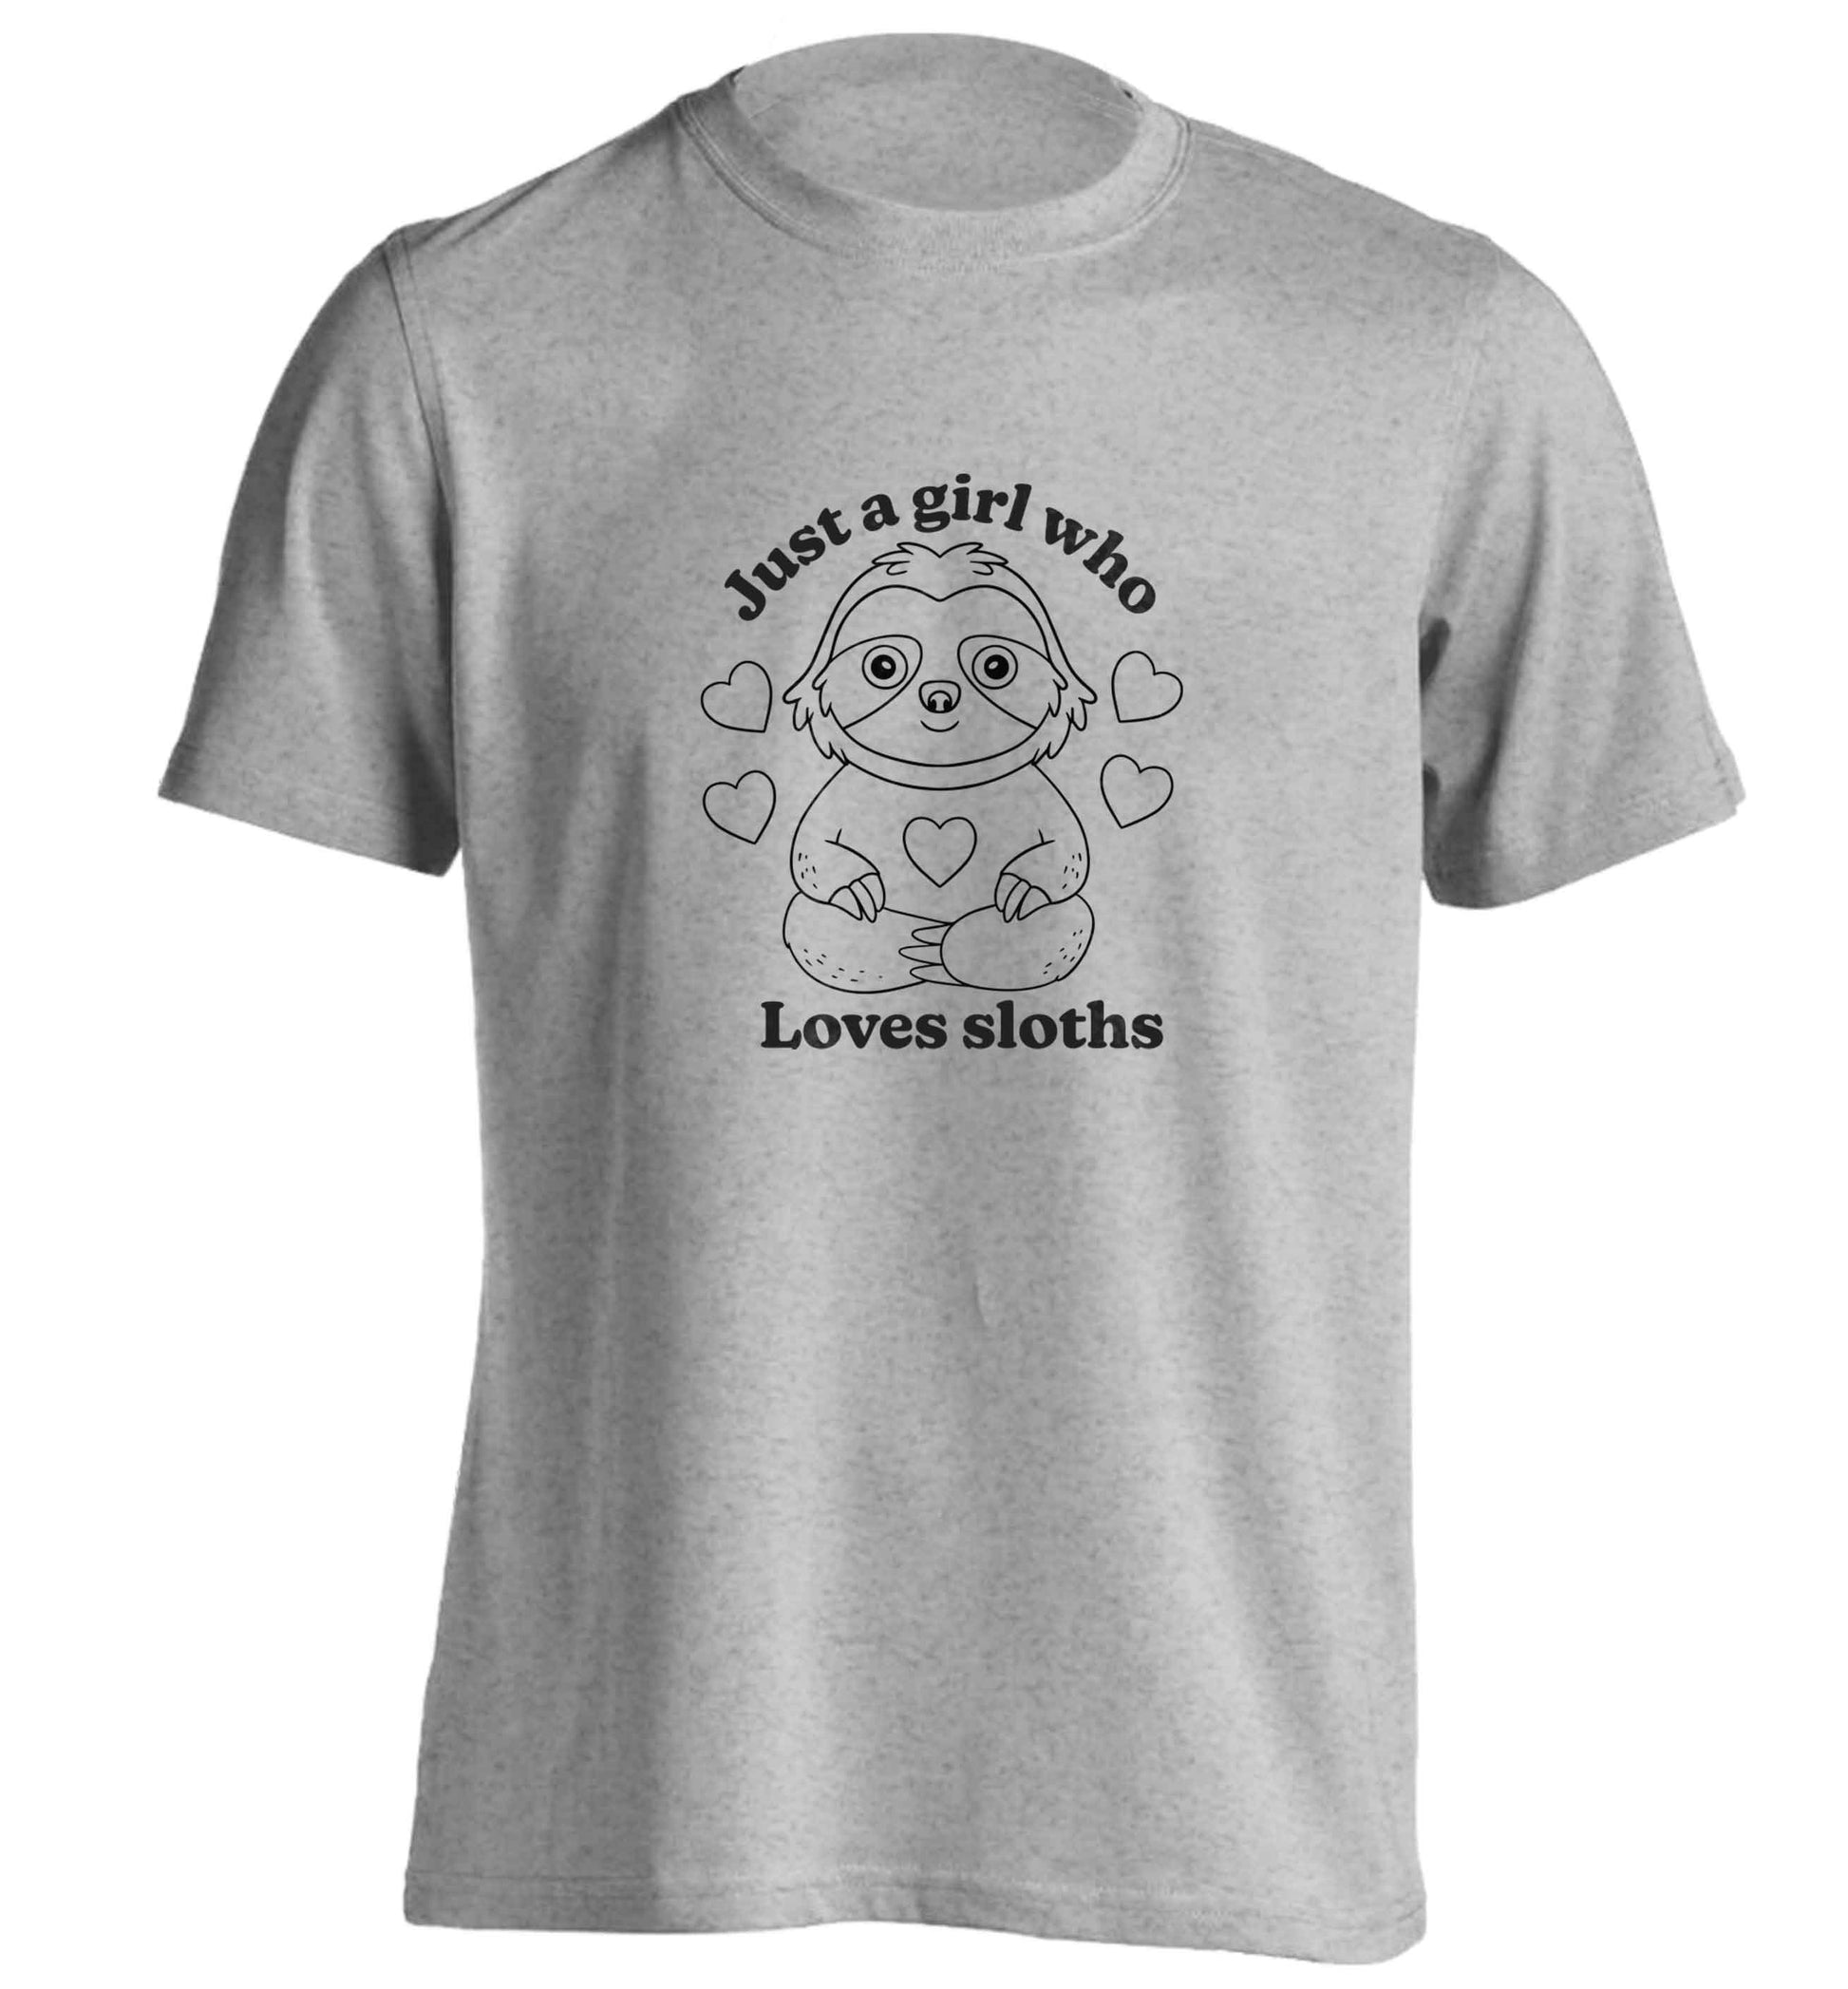 Just a girl who loves sloths adults unisex grey Tshirt 2XL